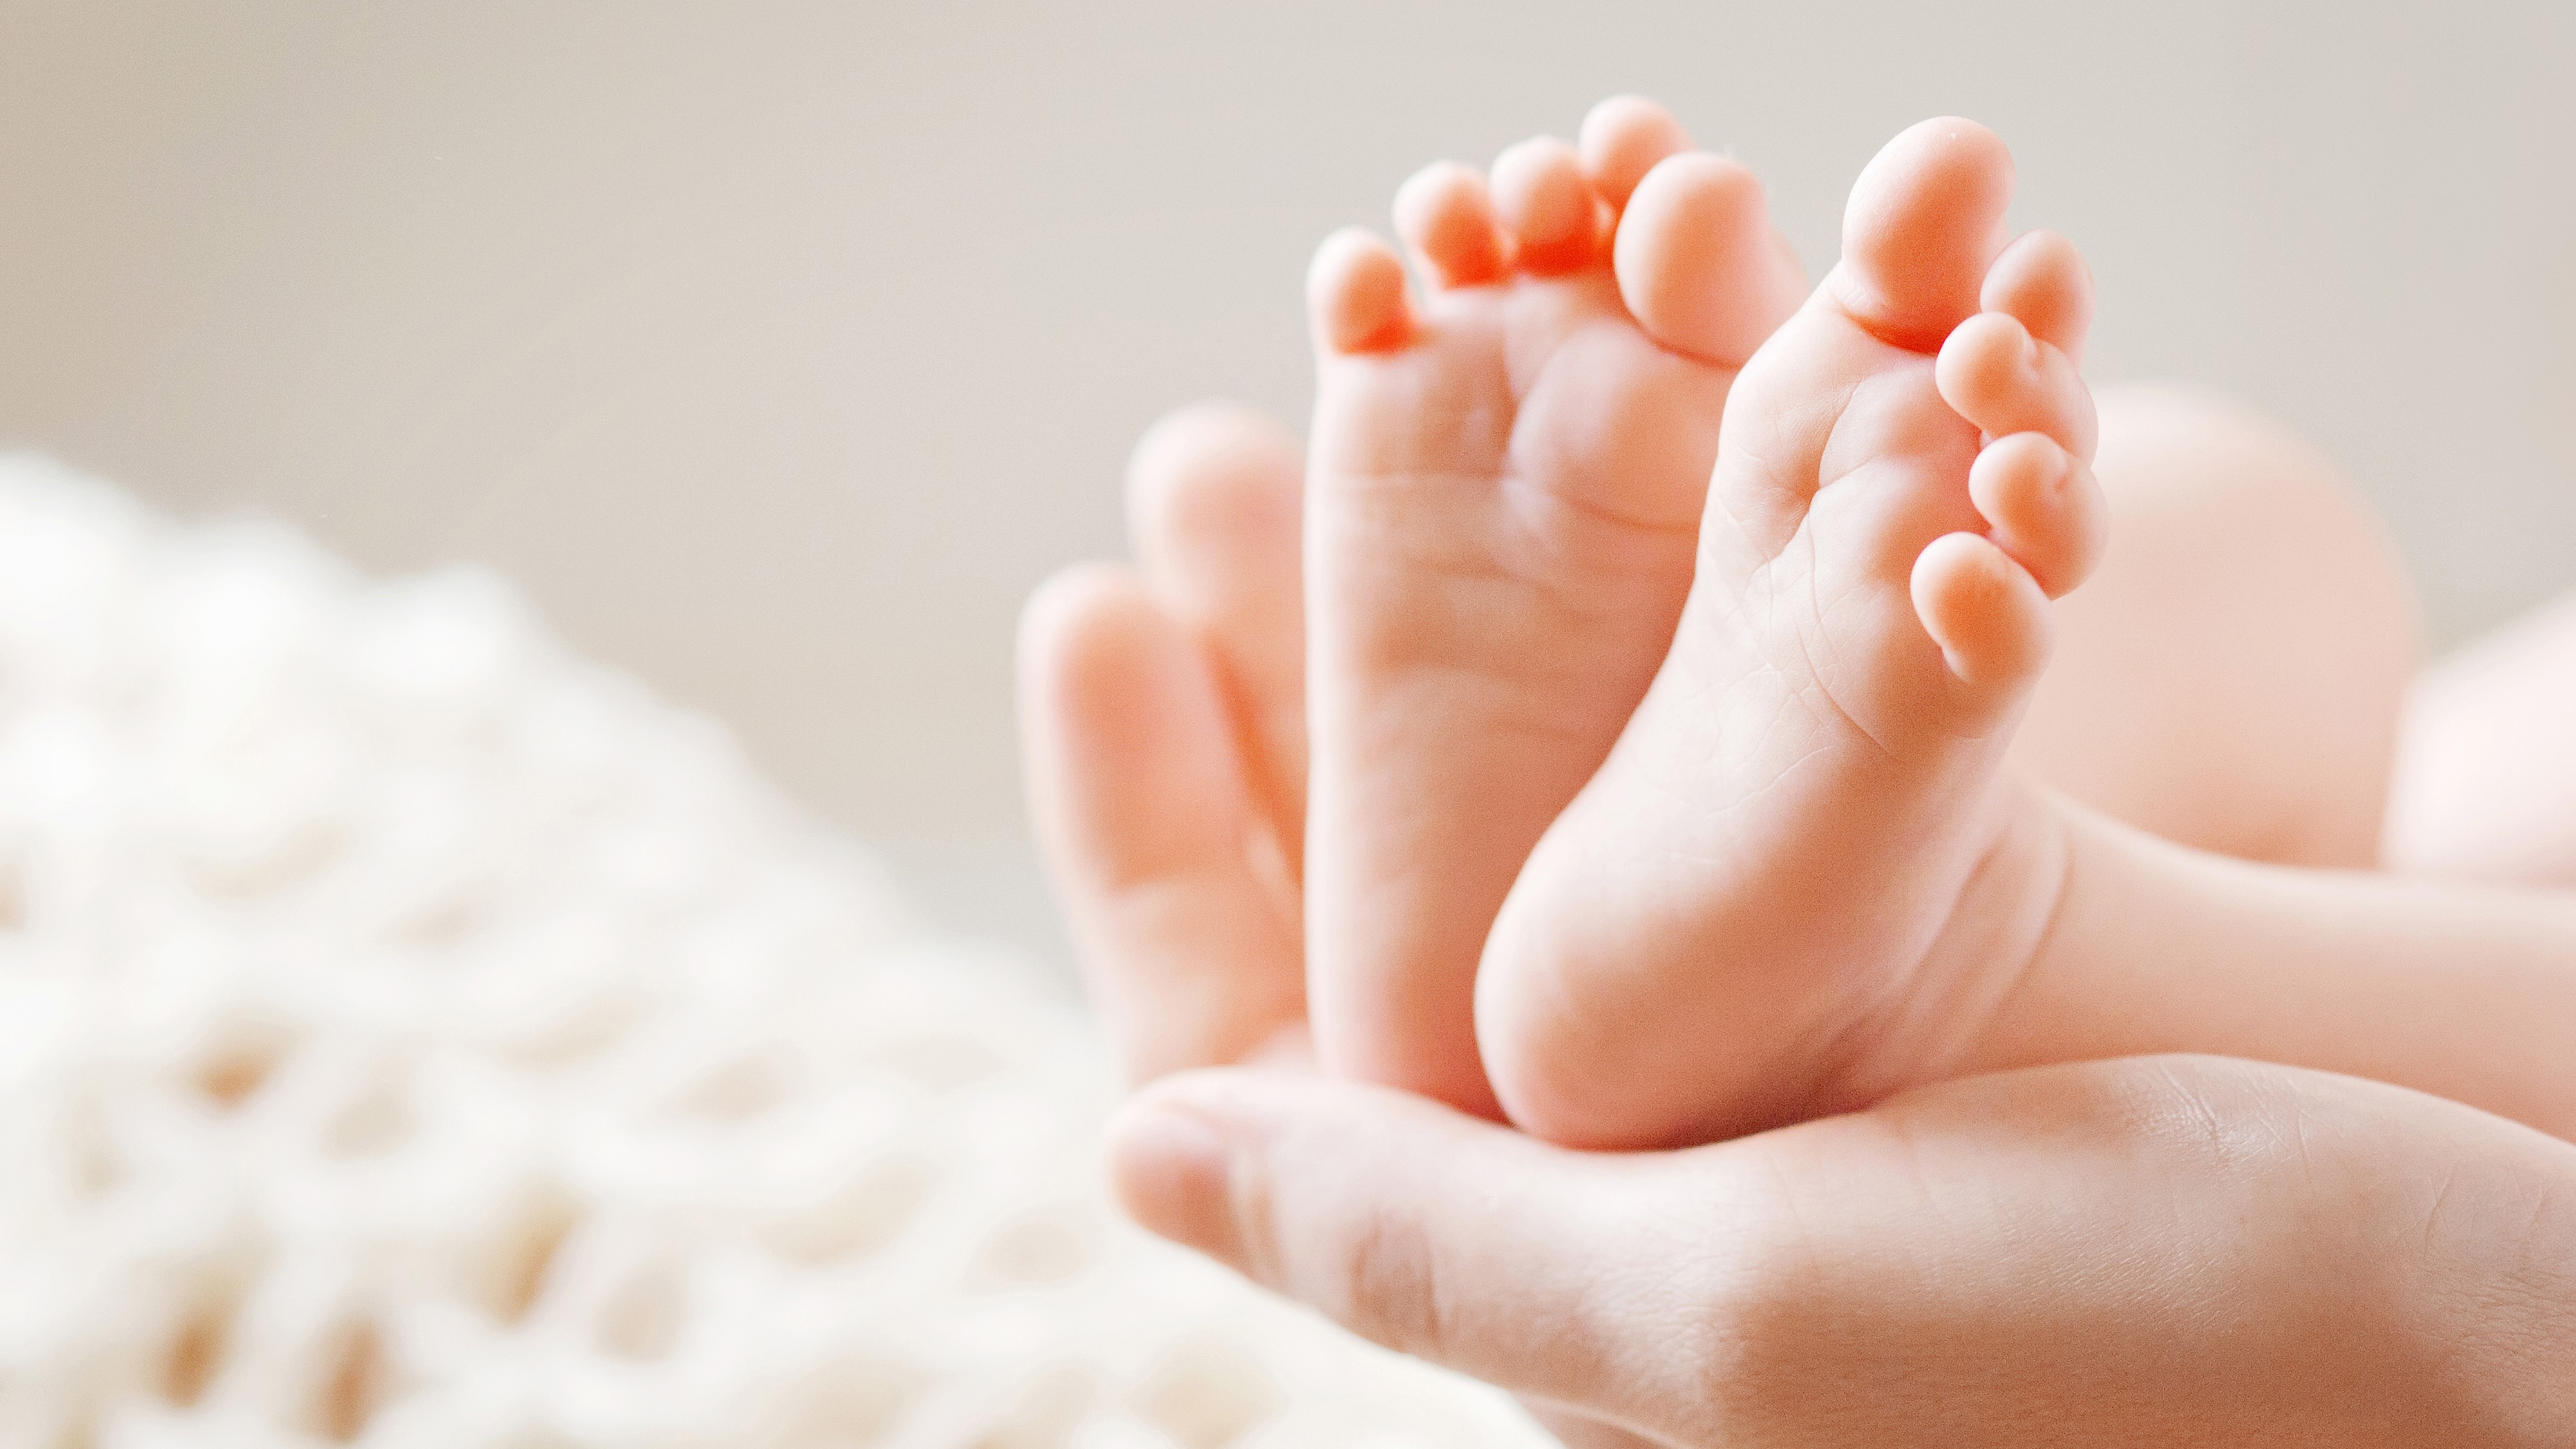 baby feet being held in a hand